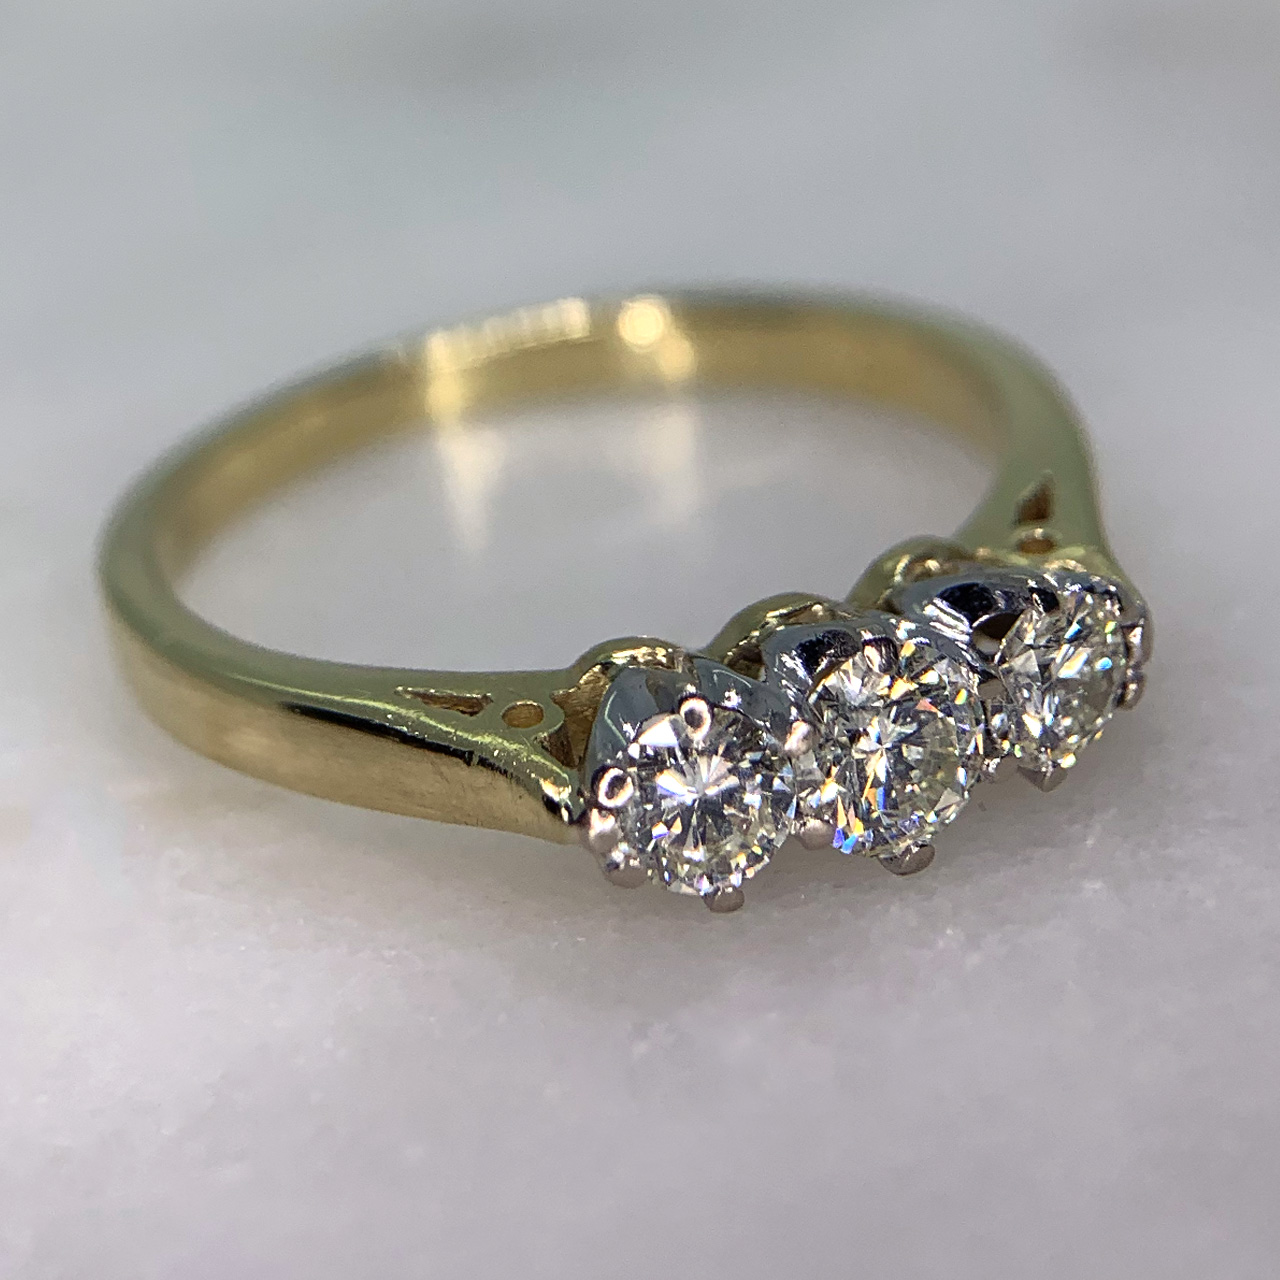 Stunning 0.50 carat Diamond Trilogy Ring in 18ct Hallmarked yellow gold, London. The ring is decorated 0.50 carats of total diamond weight (marked in the shank).  All stones are claw set in platinum with a tiffany 18ct yellow gold polished shank. This ring is in exquisite condition.